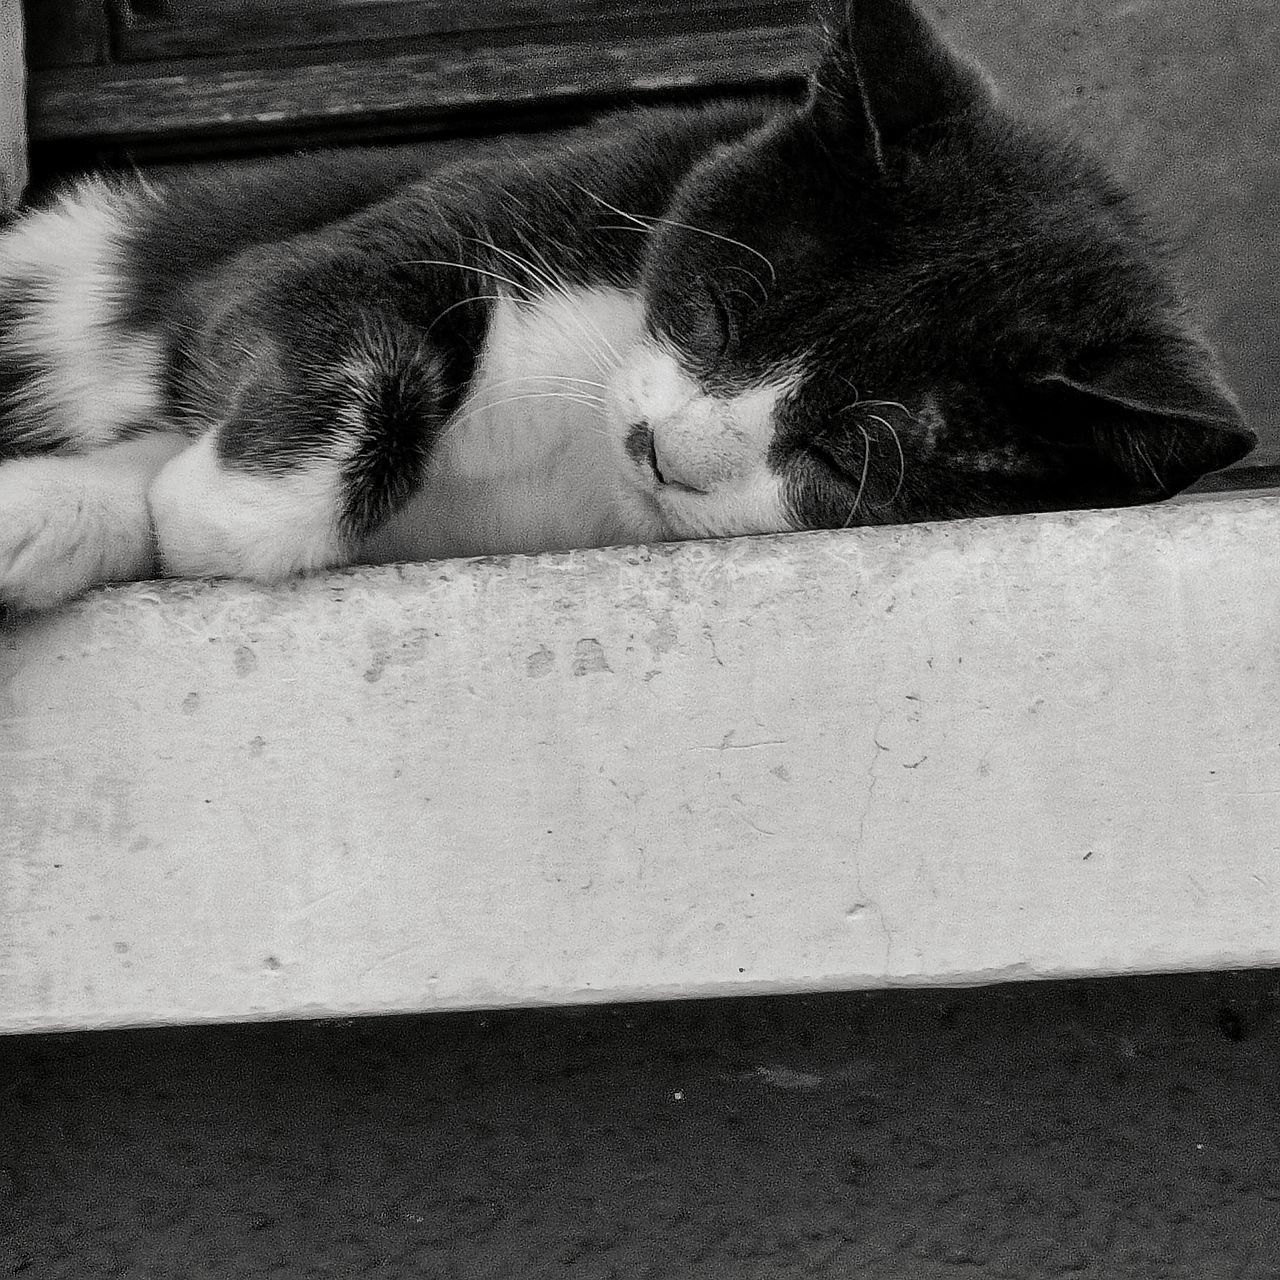 animal, animal themes, mammal, black, domestic animals, pet, white, one animal, cat, relaxation, black and white, domestic cat, feline, monochrome, sleeping, monochrome photography, resting, lying down, no people, small to medium-sized cats, whiskers, eyes closed, felidae, nose, kitten, close-up, animal body part, carnivore, day